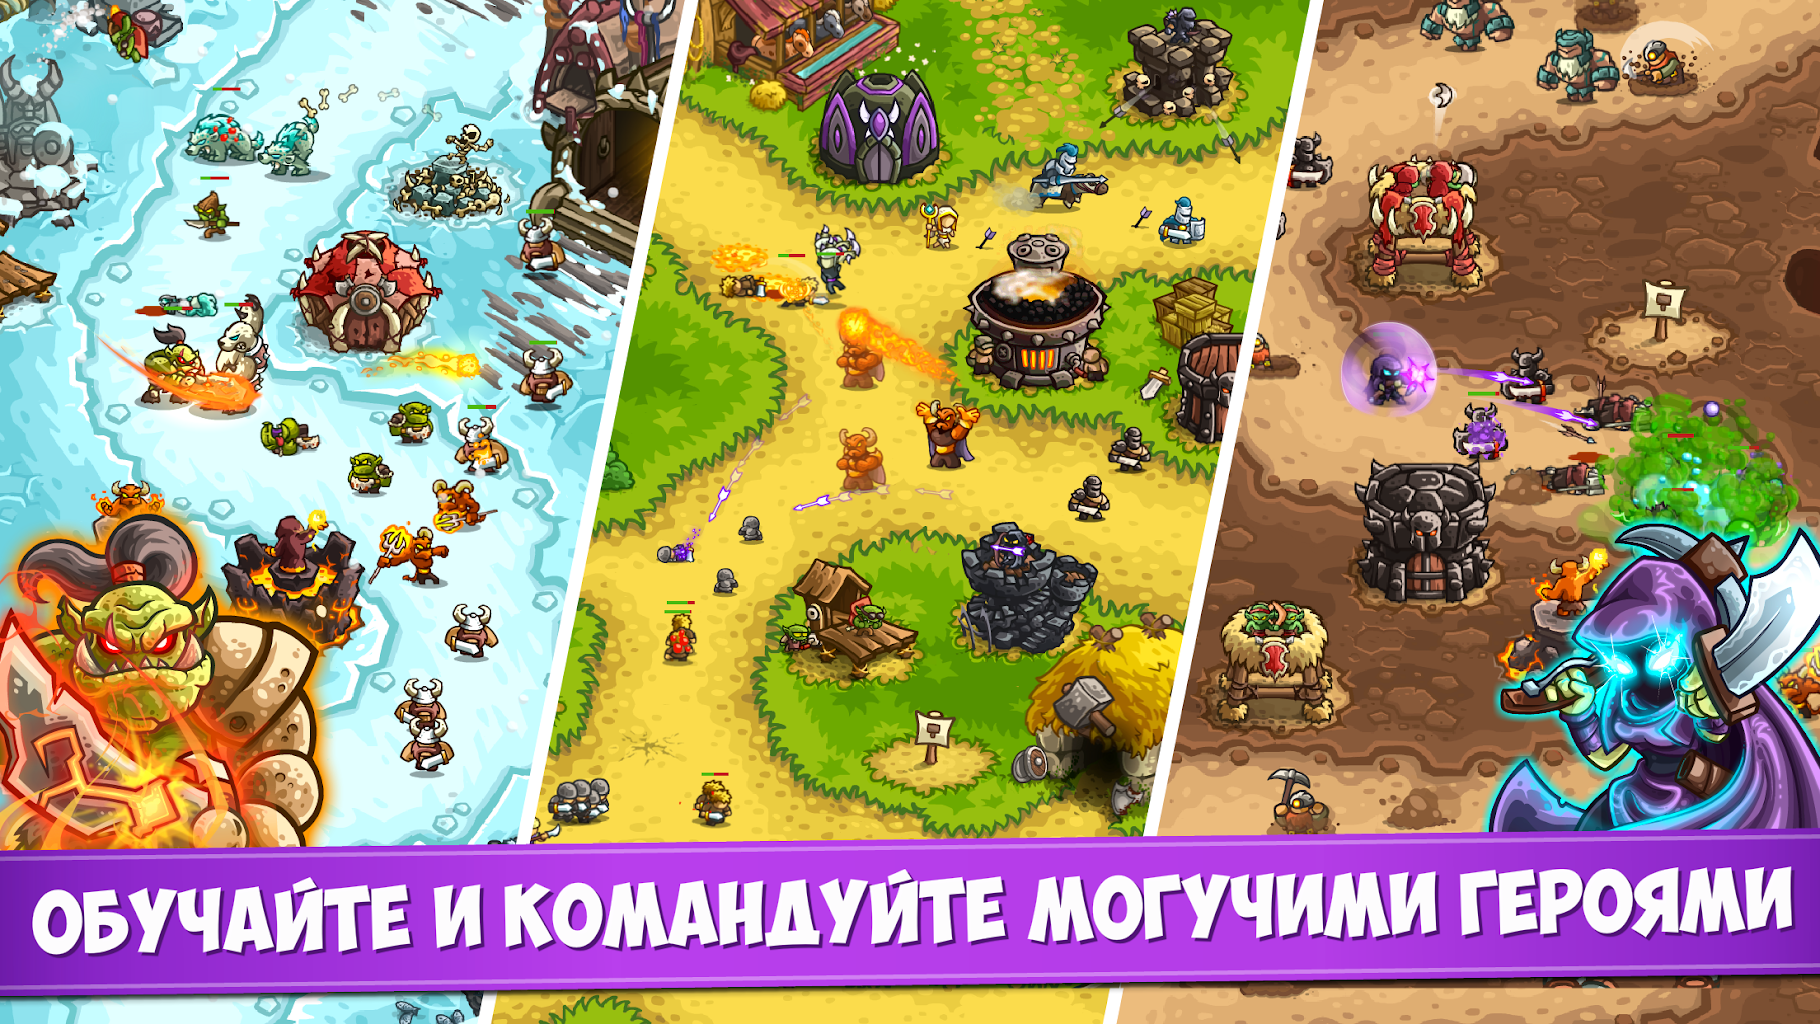 kingdom rush frontiers all heroes all stars